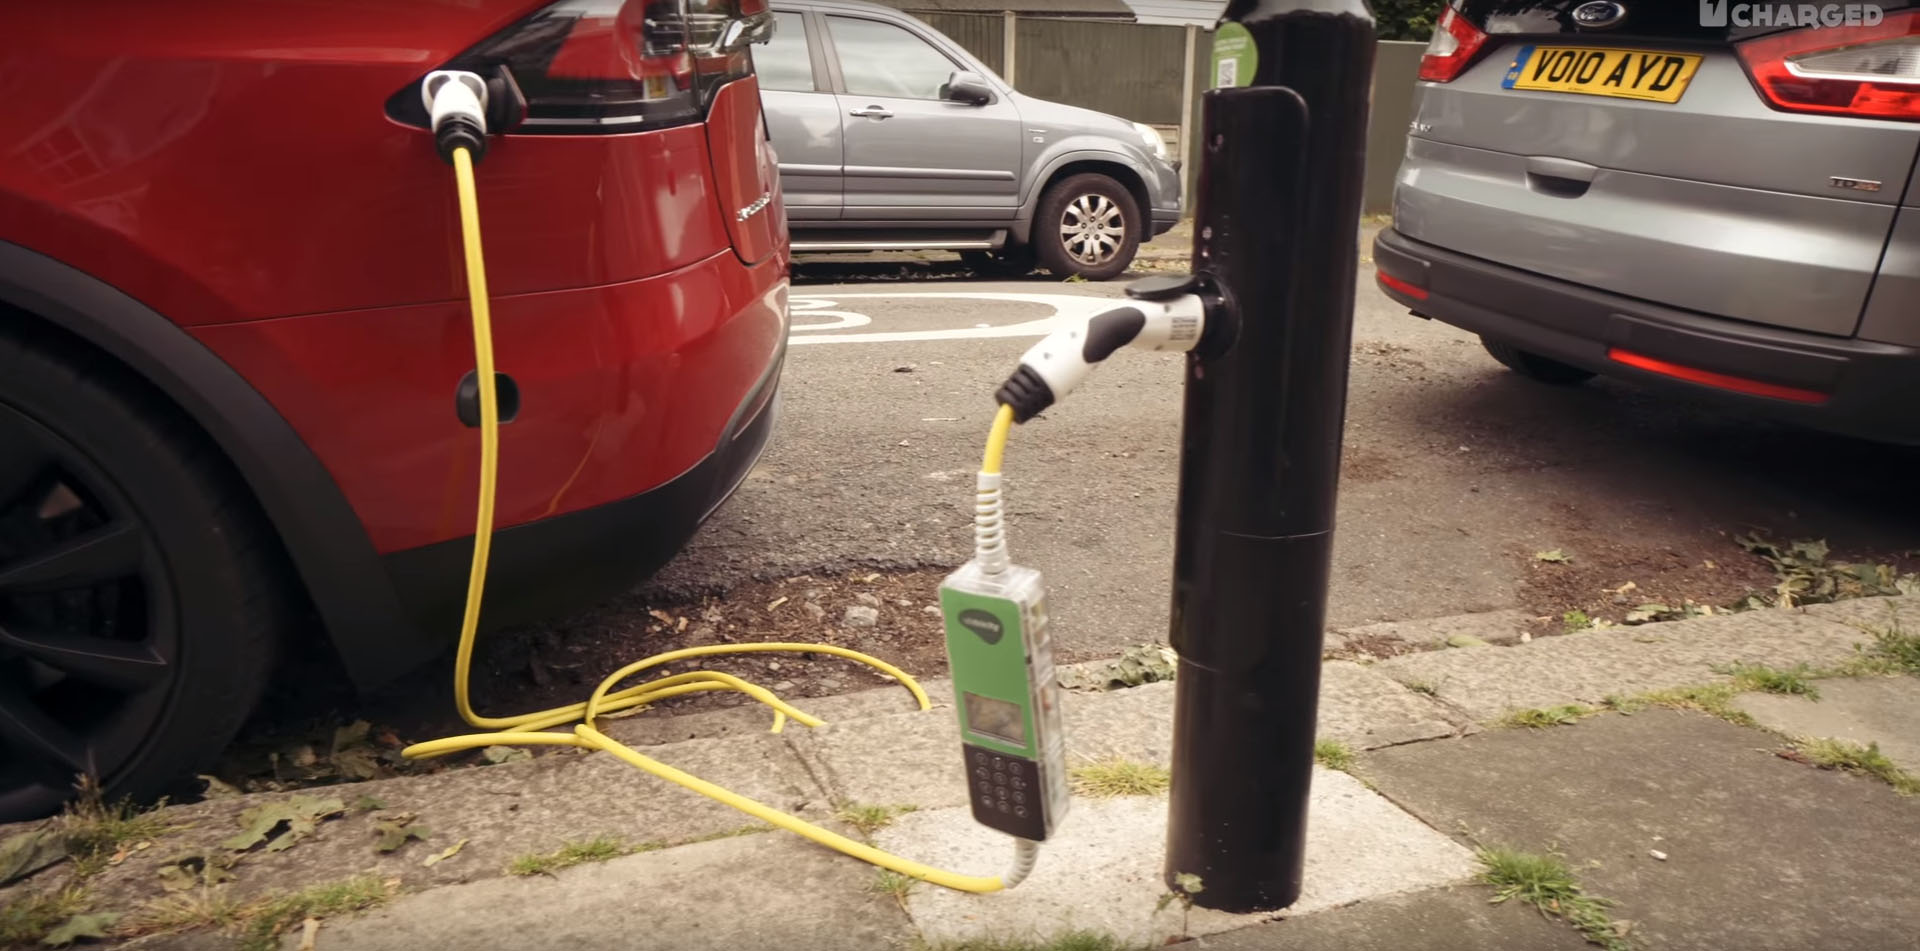 Lampposts That Double as EV Charging Points How Brilliantly Simple Is